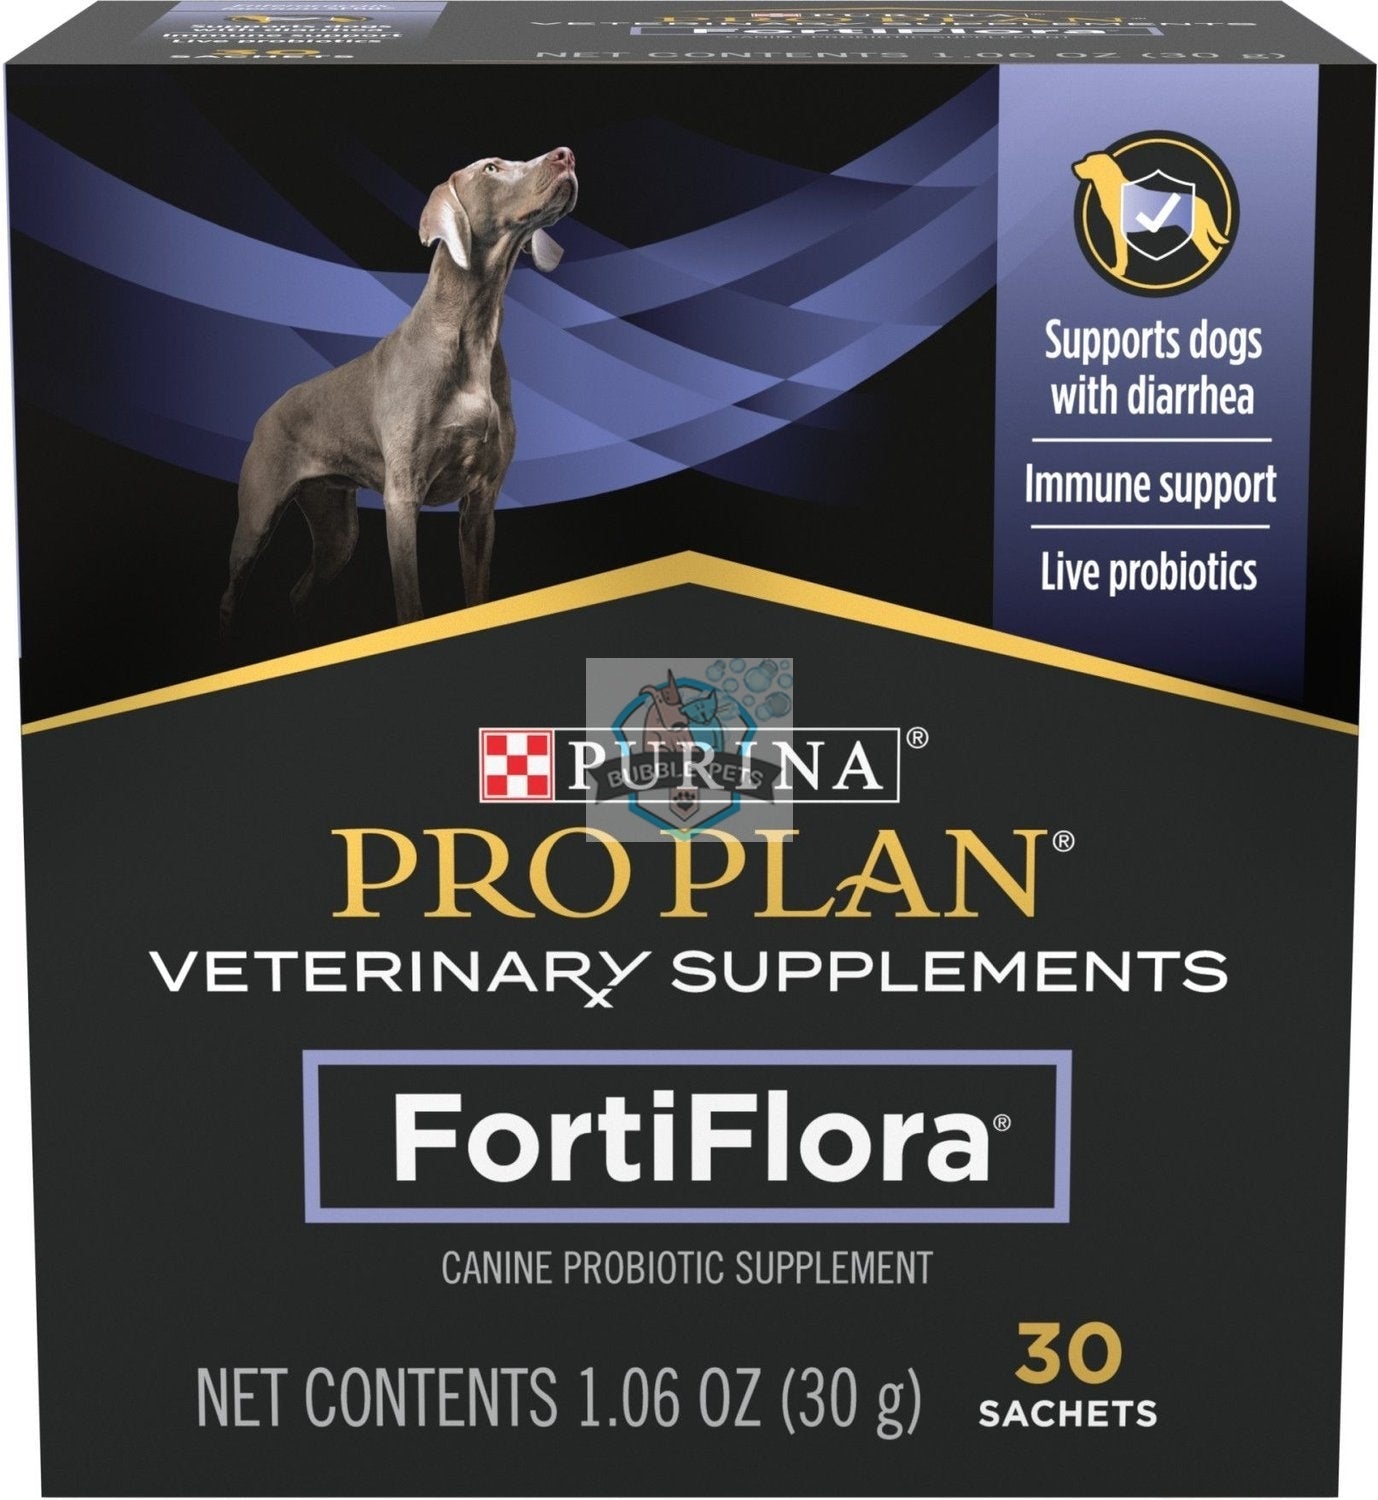 PURINA® PRO PLAN VETERINARY SUPPLEMENTS® FortiFlora™ Canine Probiotic Supplement 30g